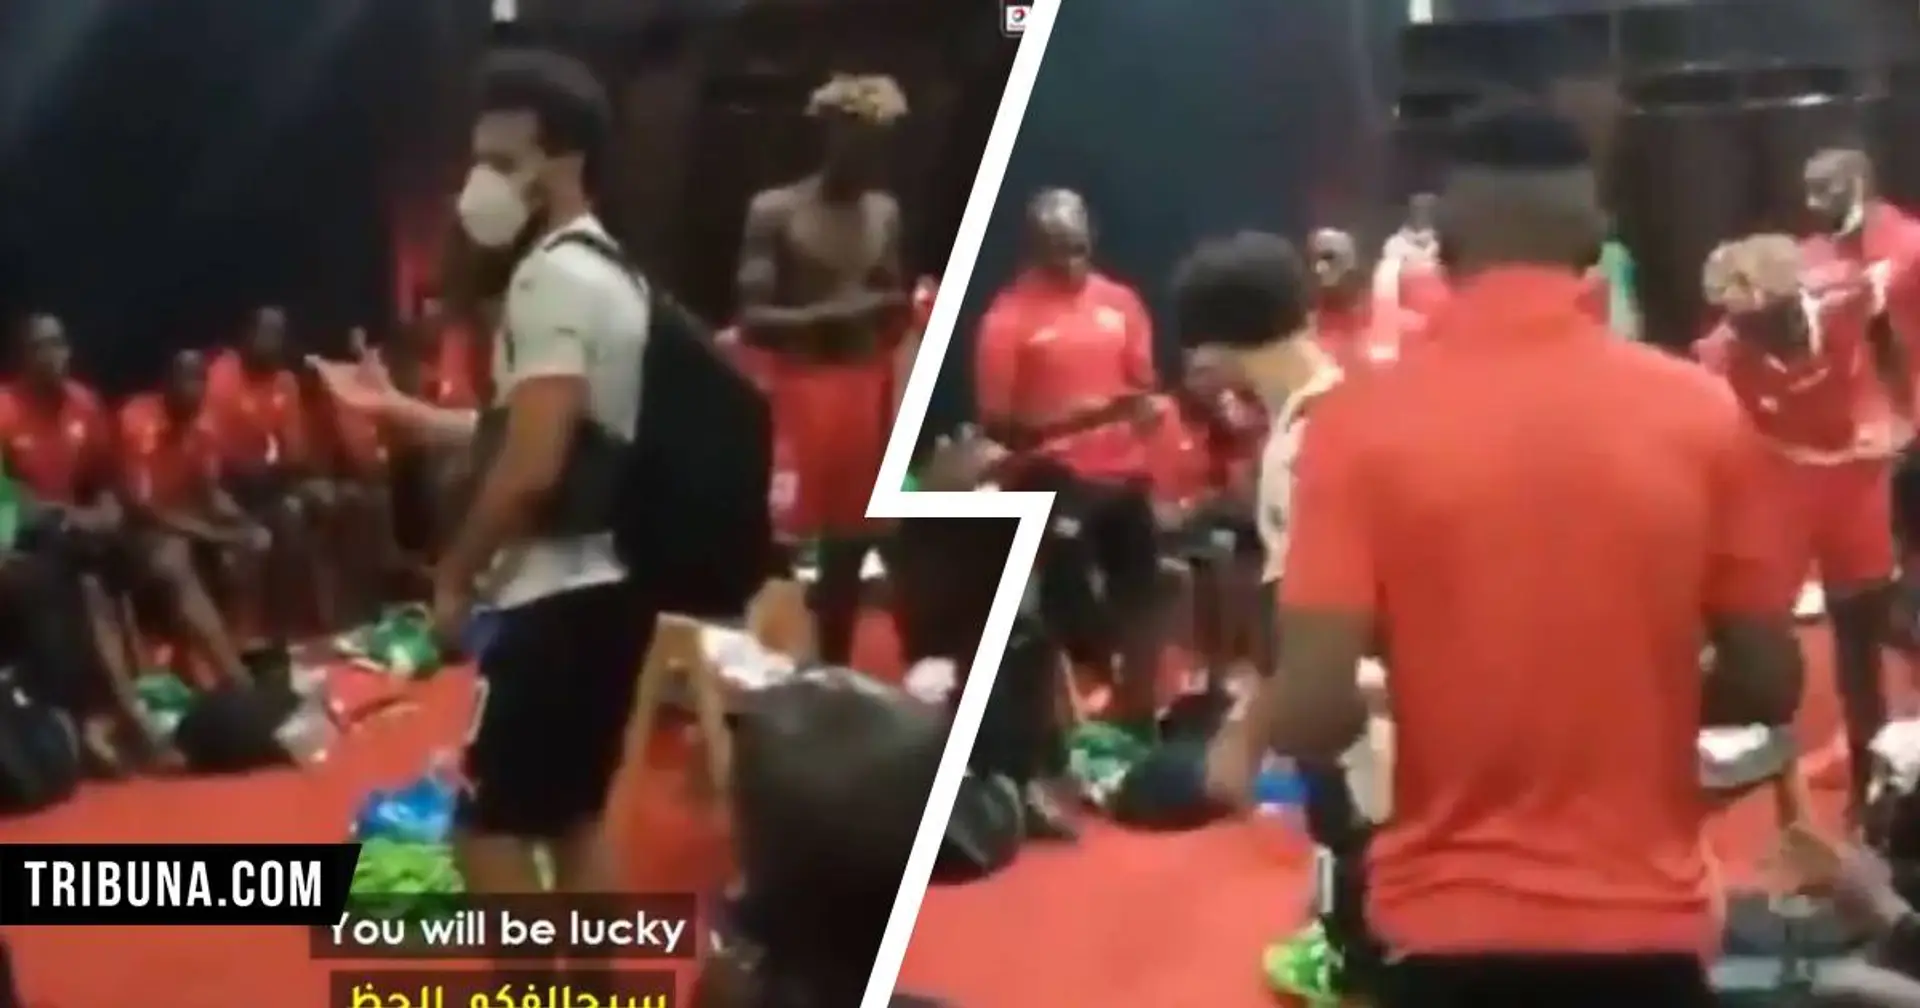 Class personified: Salah goes to Kenyan dressing room after they fail to qualify for AFCON, wishes them best of luck for future (video)